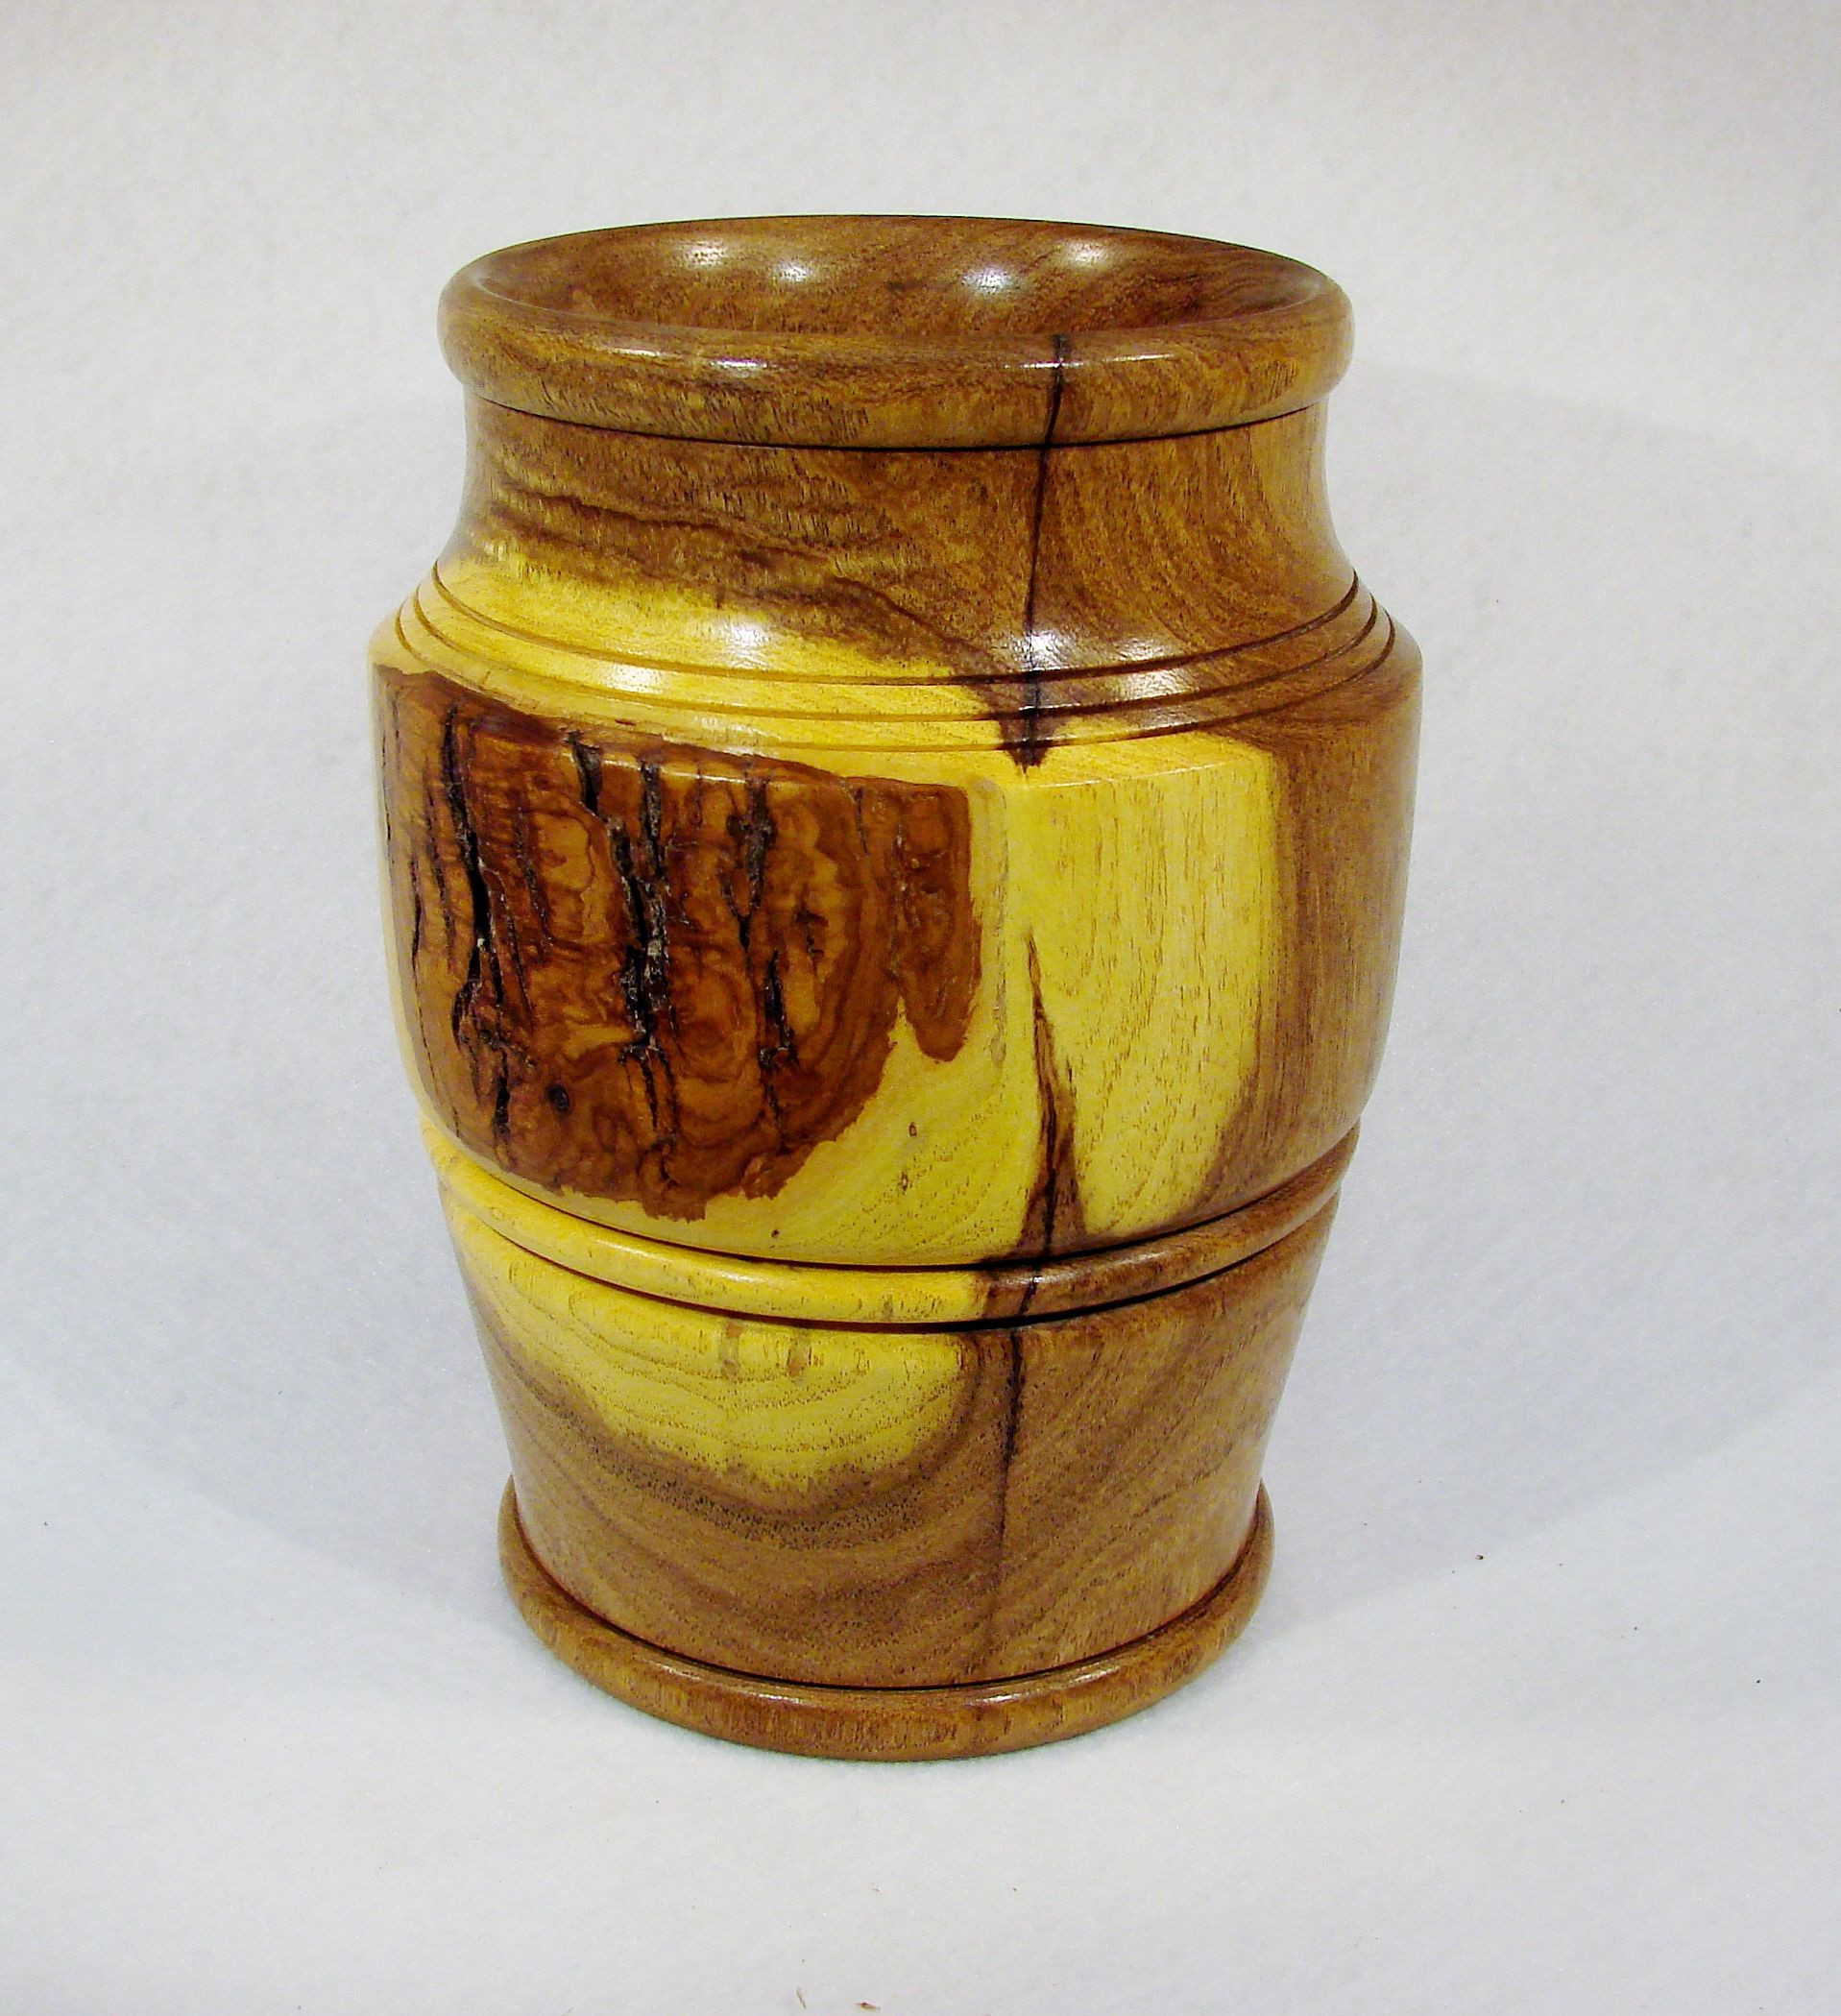 24 attractive Wood Turned Vase 2024 free download wood turned vase of lathe turned vase of mesquite natural bark detail on one side and regarding lathe turned vase of mesquite natural bark detail on one side and yellow sapwood are